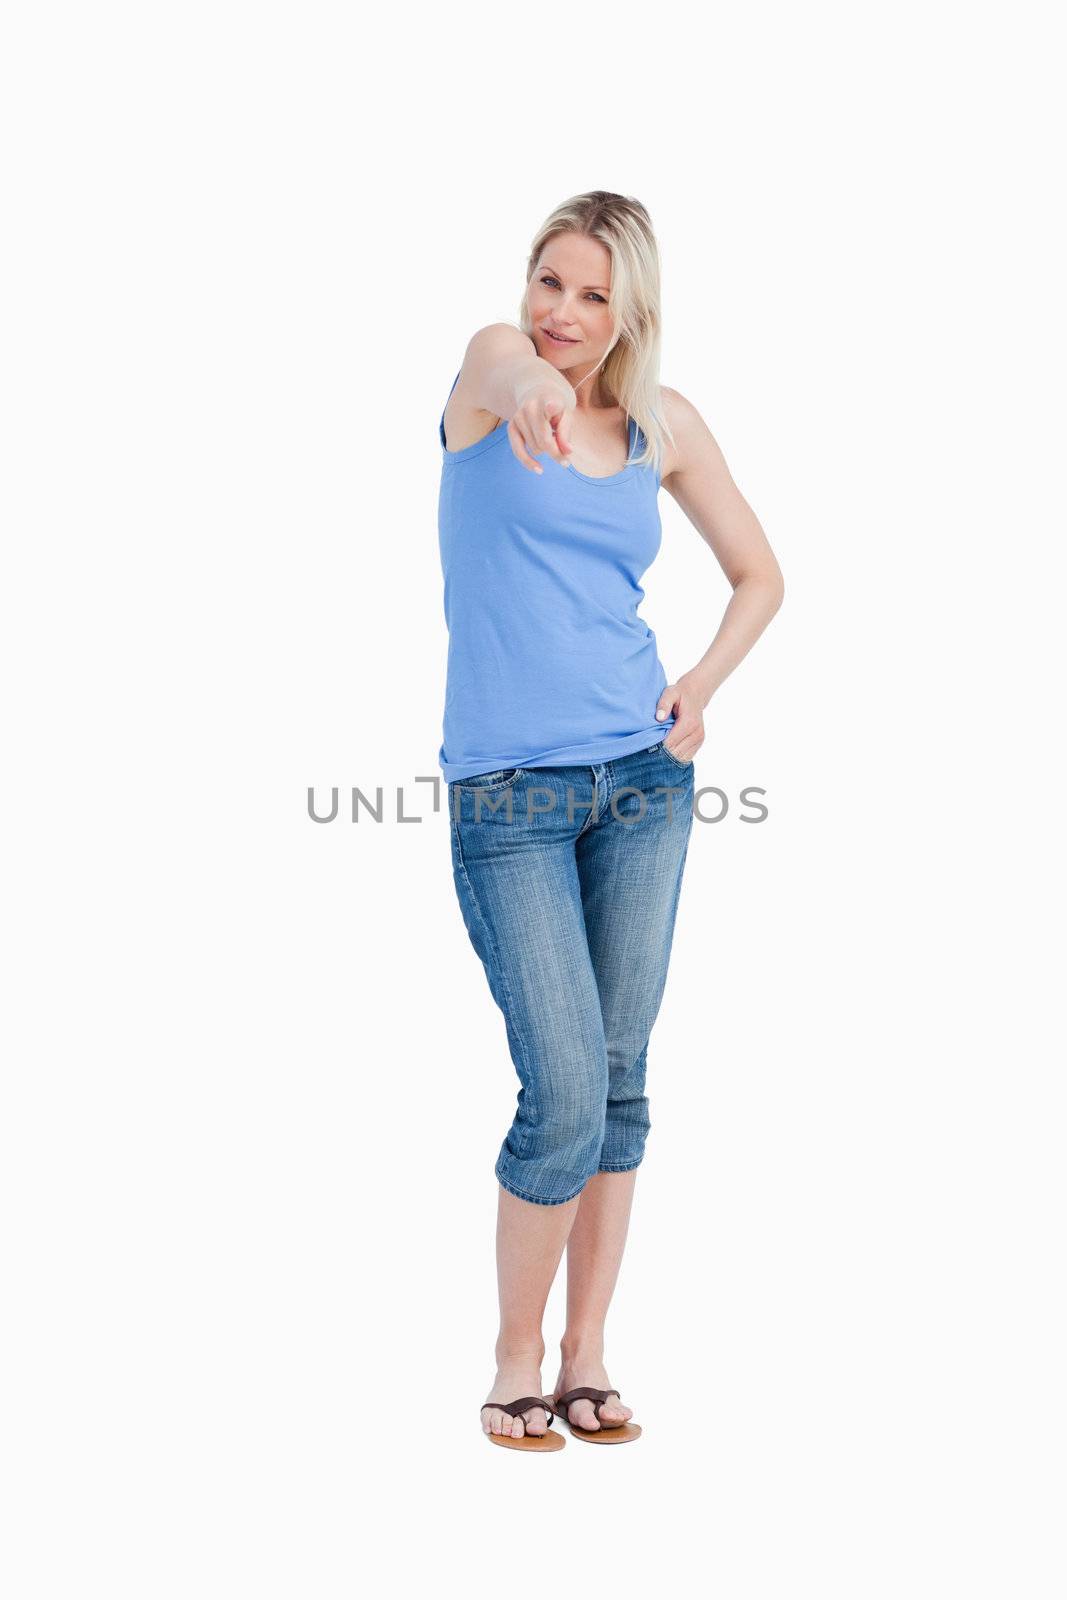 Relaxed blonde woman pointing her finger against a white background